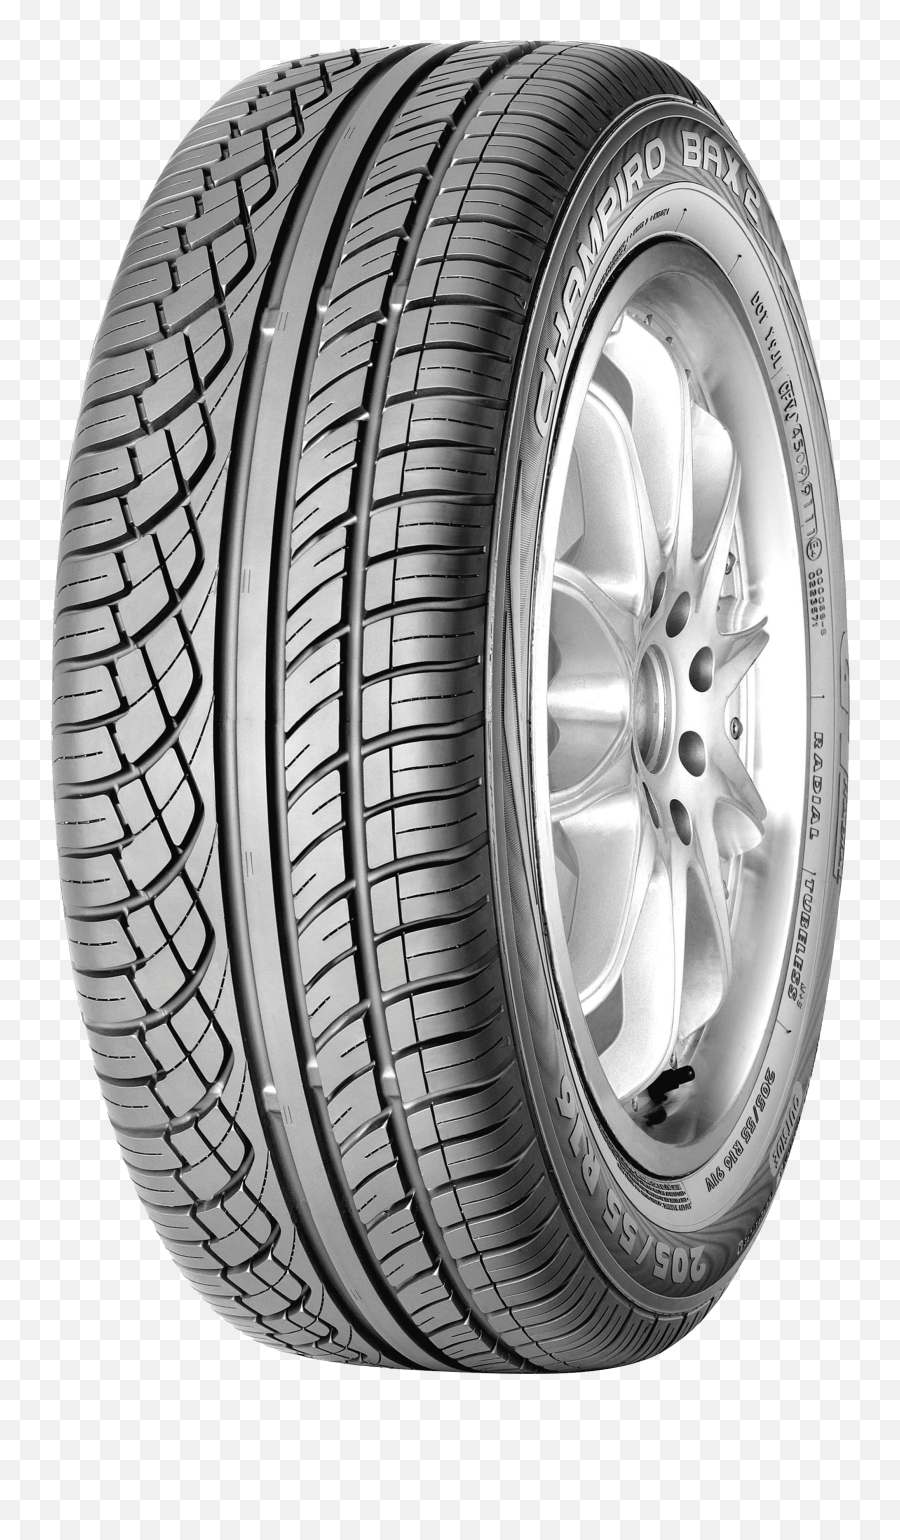 Tires Icon Clipart 22030 - Web Icons Png Michelin 245 40 R17 91 W,Car Tire Icon